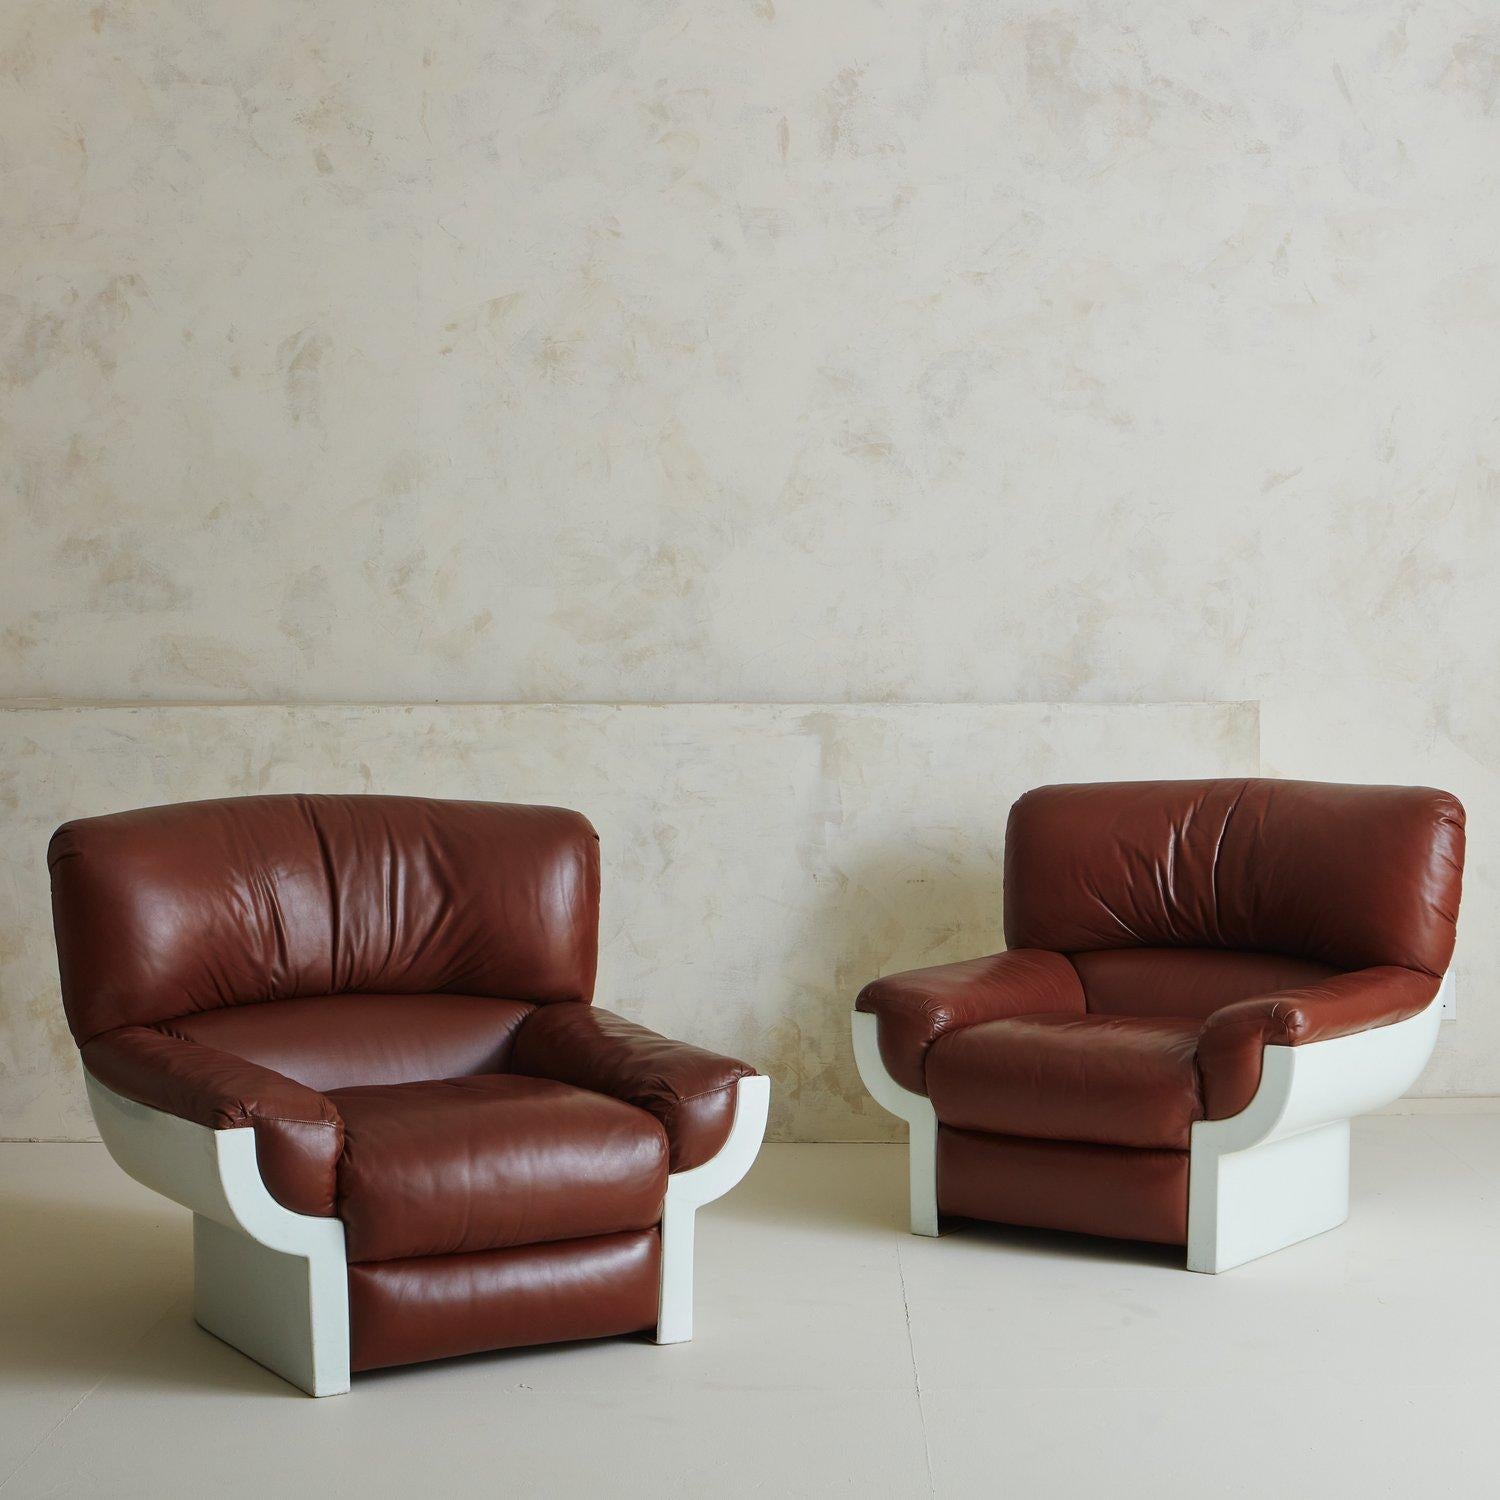 Two ‘Flou’ lounge chairs designed by Augusto Betti for Habitat Faenza in 1968. These chairs have sculptural white fiberglass frames and feature original cognac leather upholstery. Sourced in Italy. Two Available, Priced Individually.

Augusto Betti